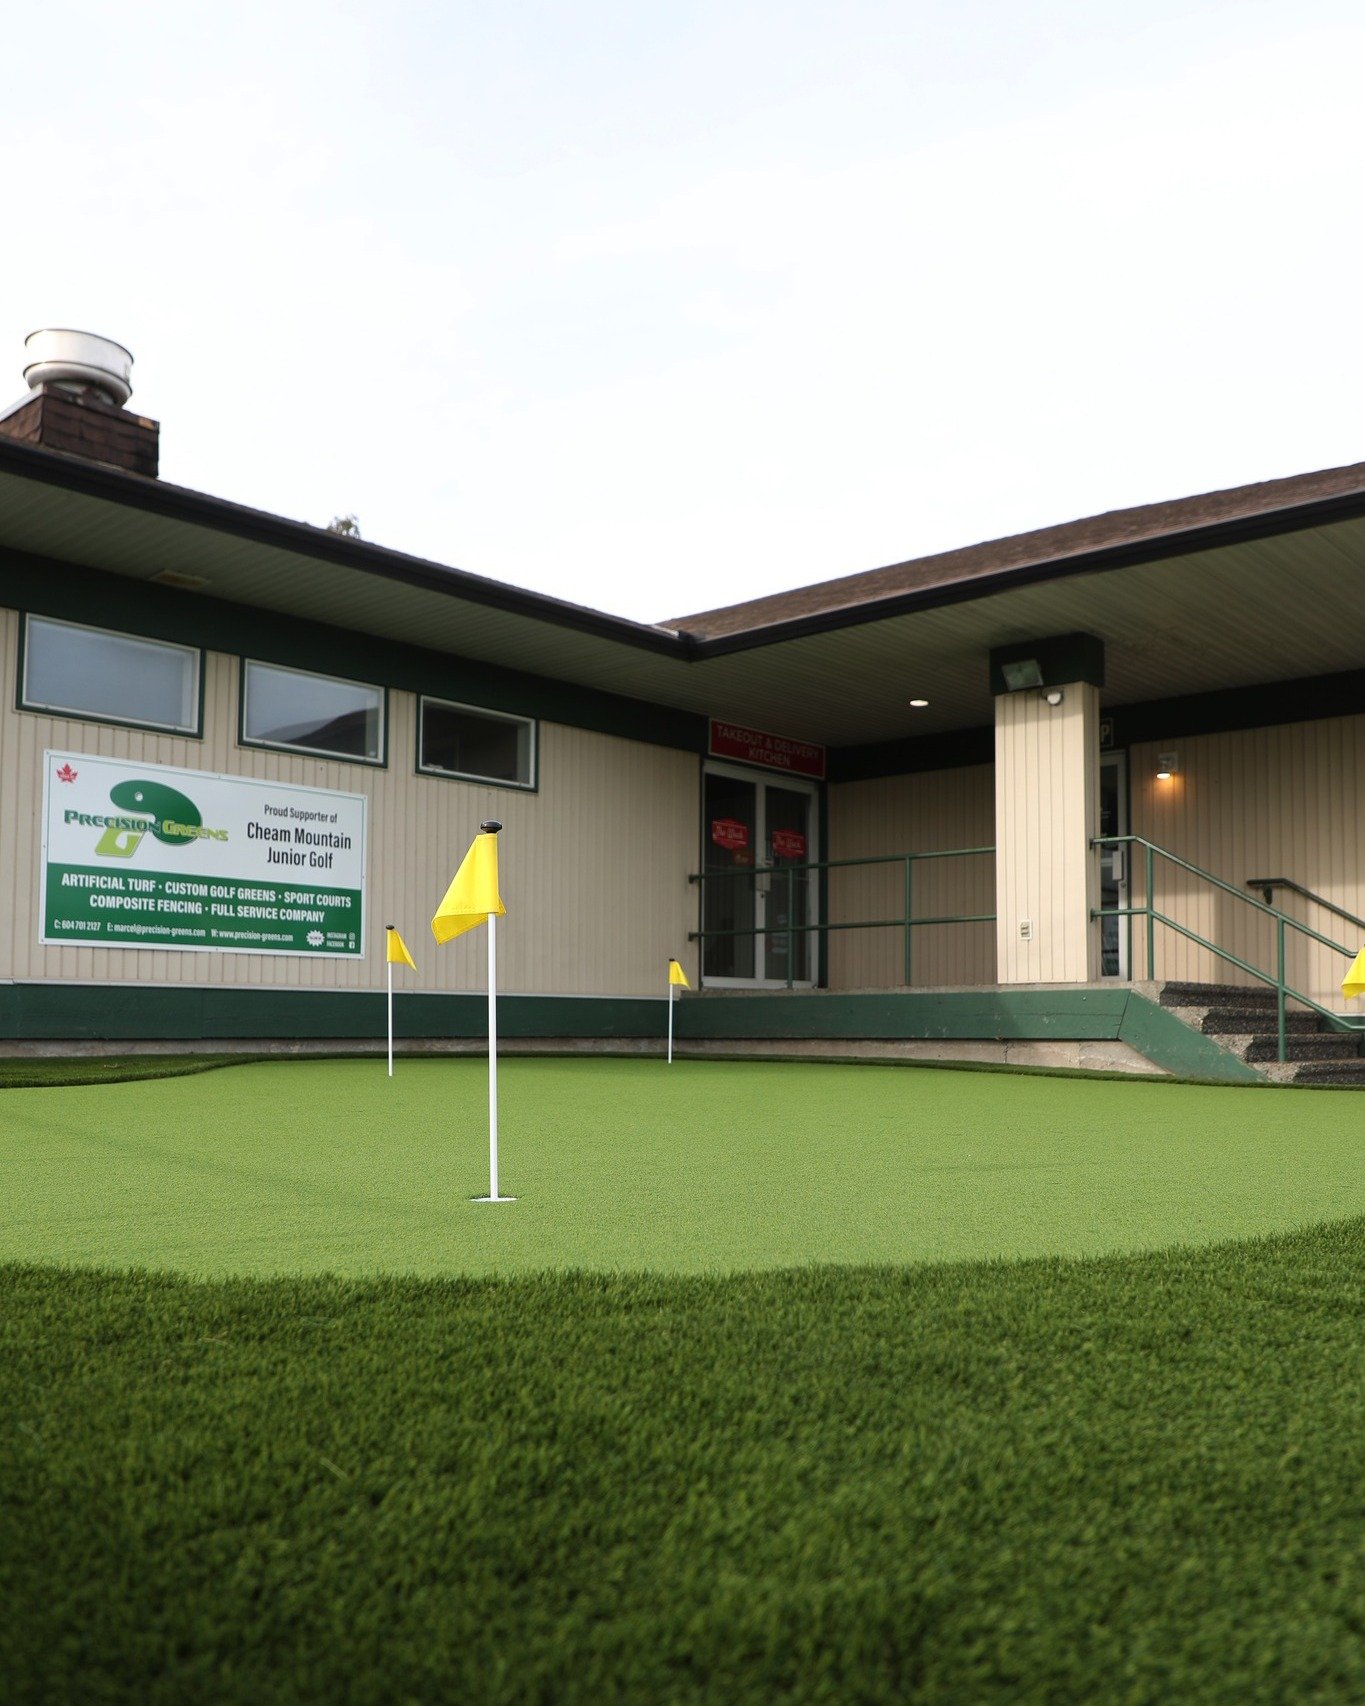 The greatest weekend in golf is fast approaching!
The Masters weekend starts this Thursday and why not spend some time golfing or even just looking like a golfer?!
The best golf shop in all of Chilliwack is at @cheammountaingolfcourse on Luckakuck Wa